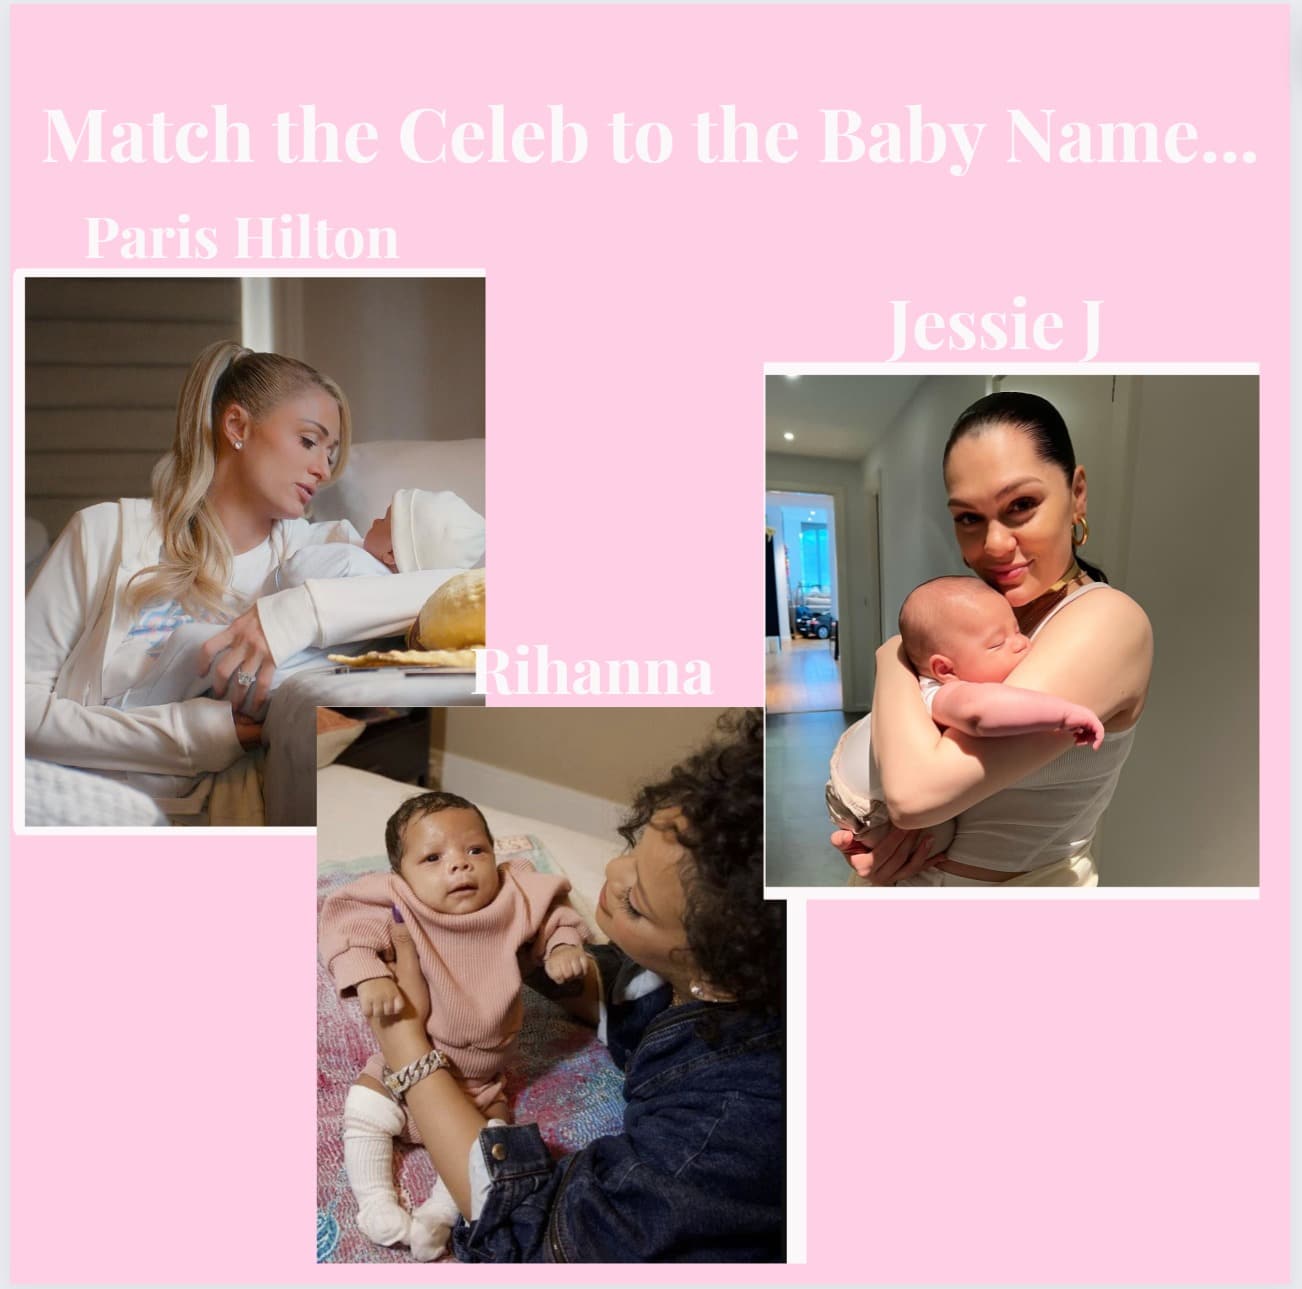 8. Match the celeb to the baby's name